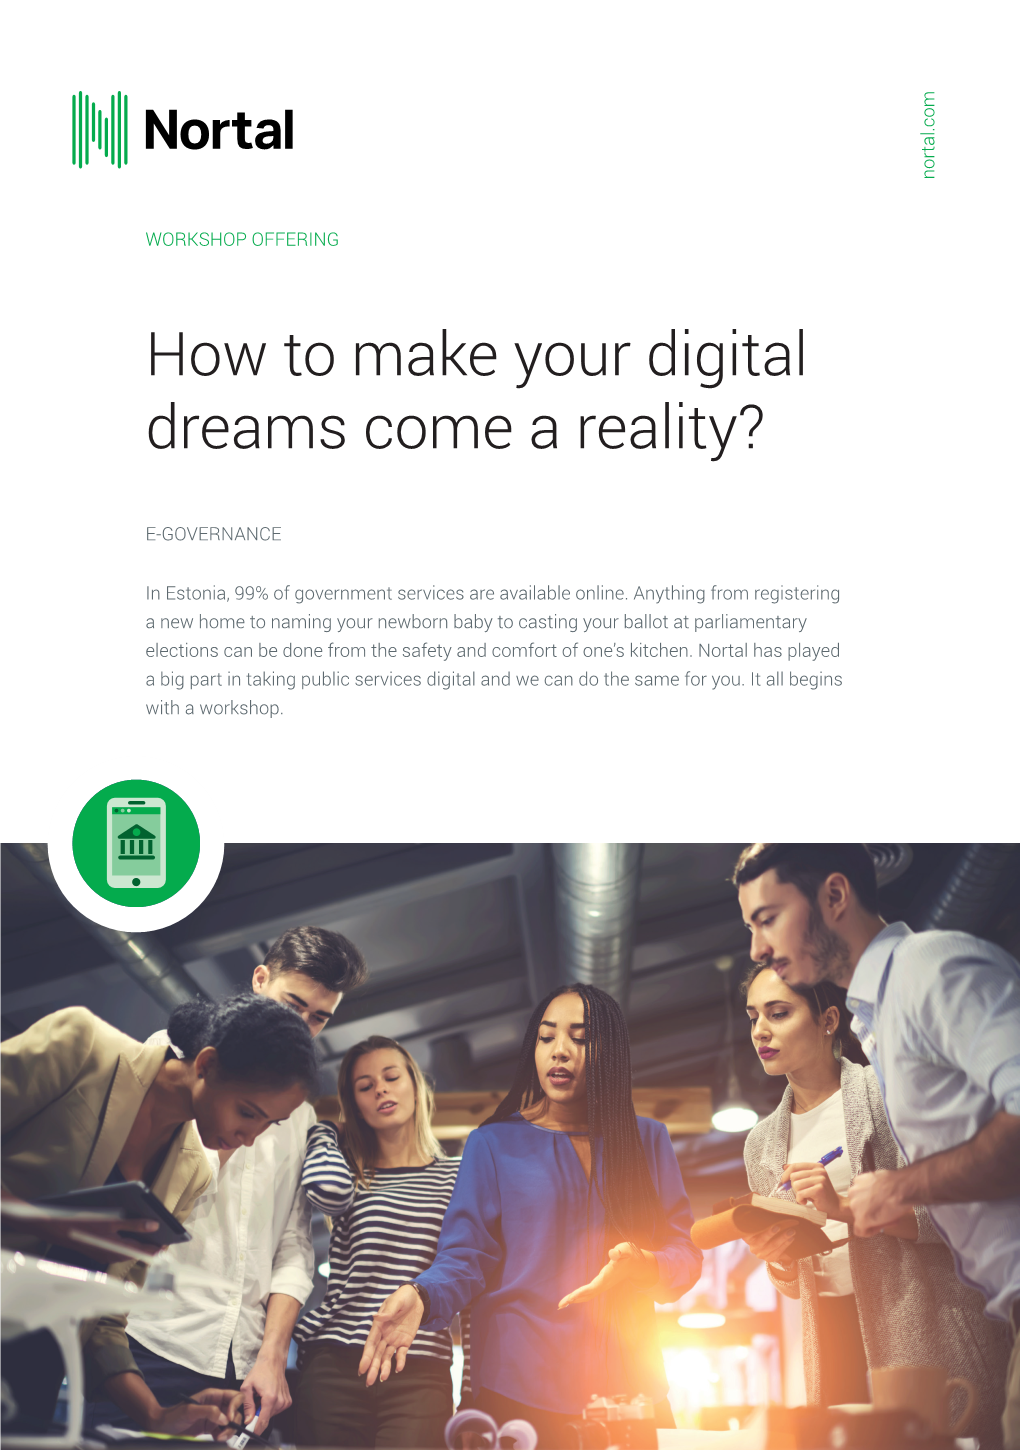 How to Make Your Digital Dreams Come a Reality?